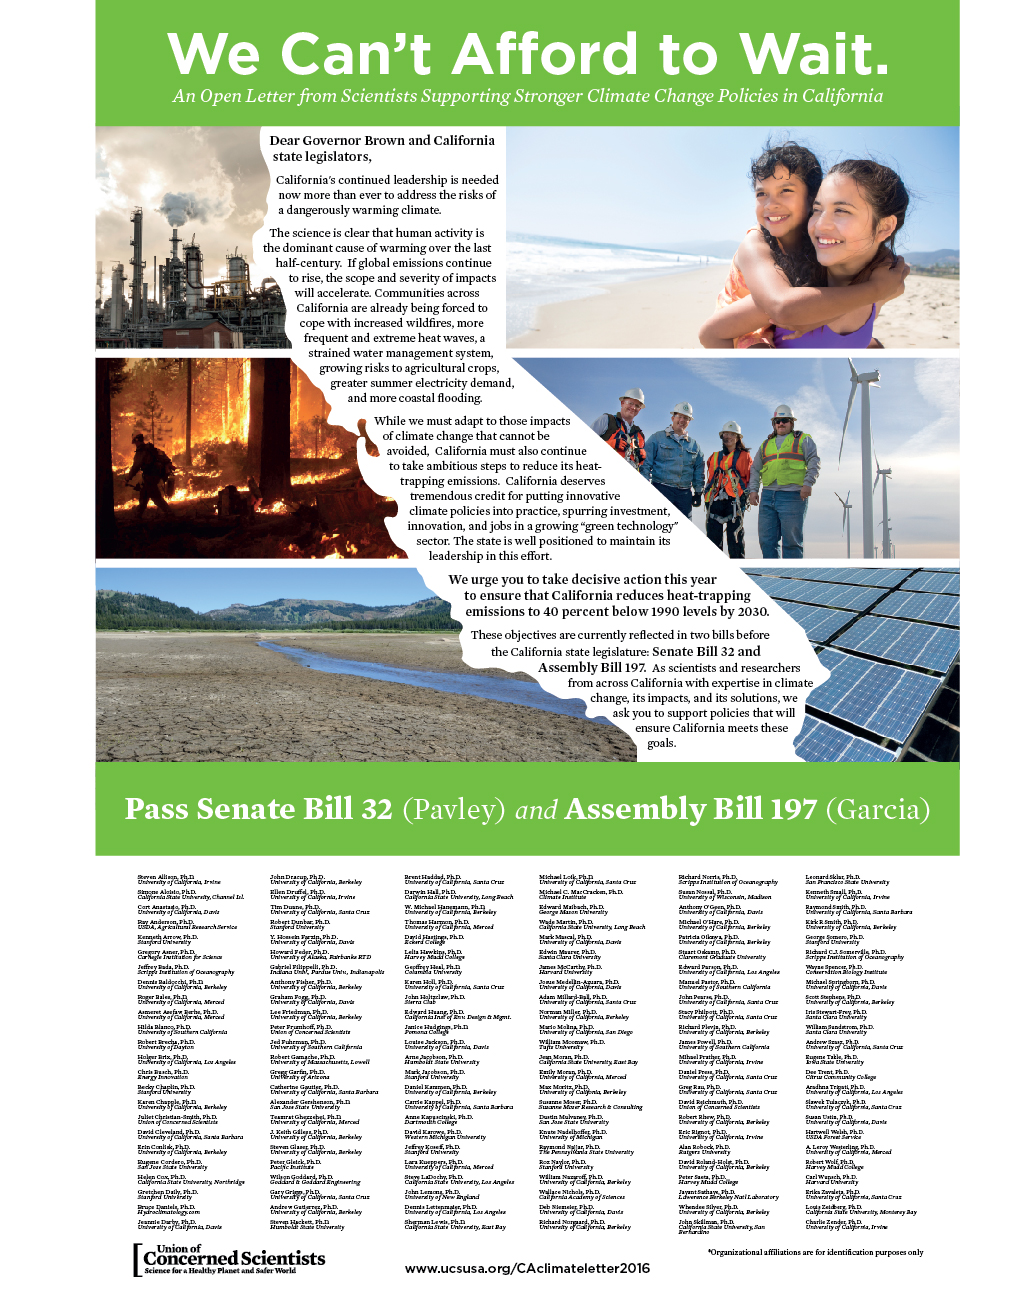 144 scientists, economists, and other scholars are urging passage of two climate change bills before the California Legislature, Senate Bill 32 (Pavley) and Assembly Bill 197 (E. Garcia).